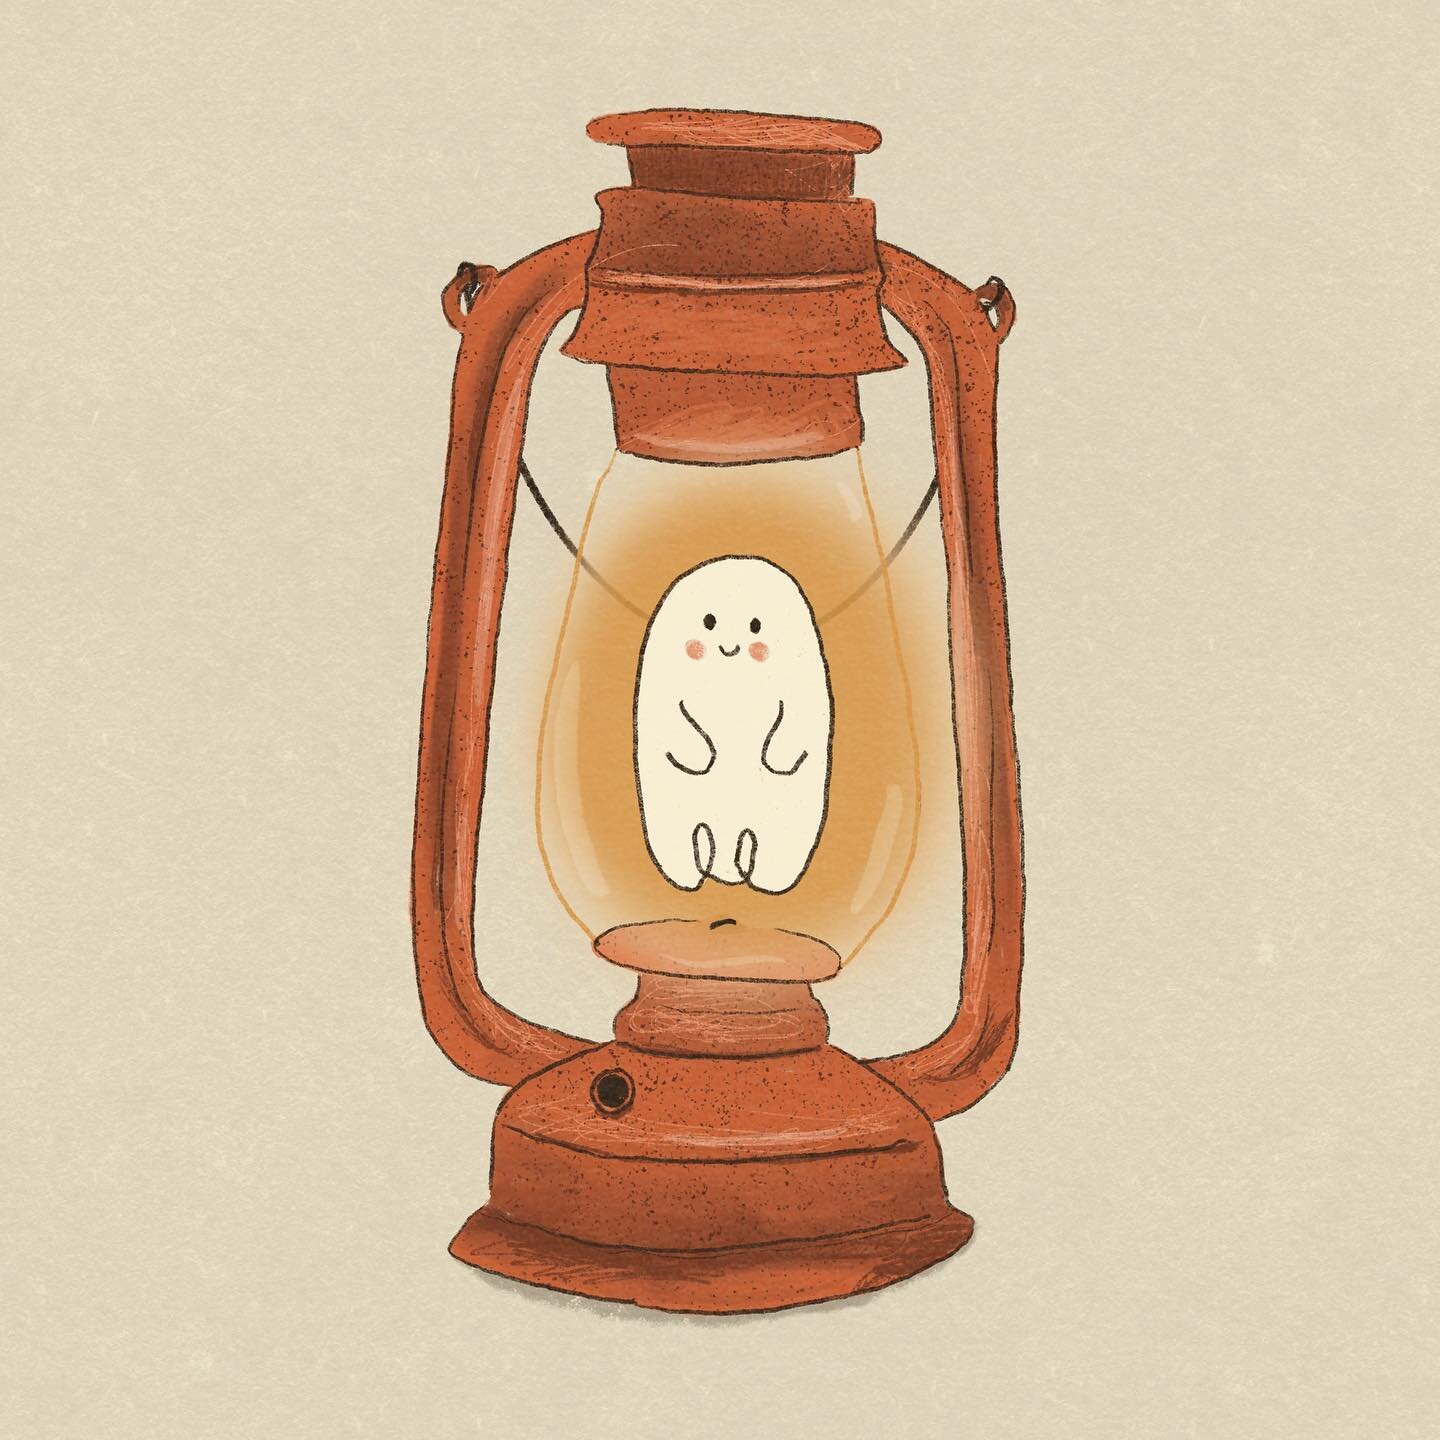 @peachtober Day 10: Lantern. Boo will light the way! P.S. He volunteered. I really want this one as a sticker &mdash; do you?
.
.
.
.
.
.
.

#artistsofinstagram #art #illustration #artistsoninstagram #artinspiration #digitalillustrator #digitalillust